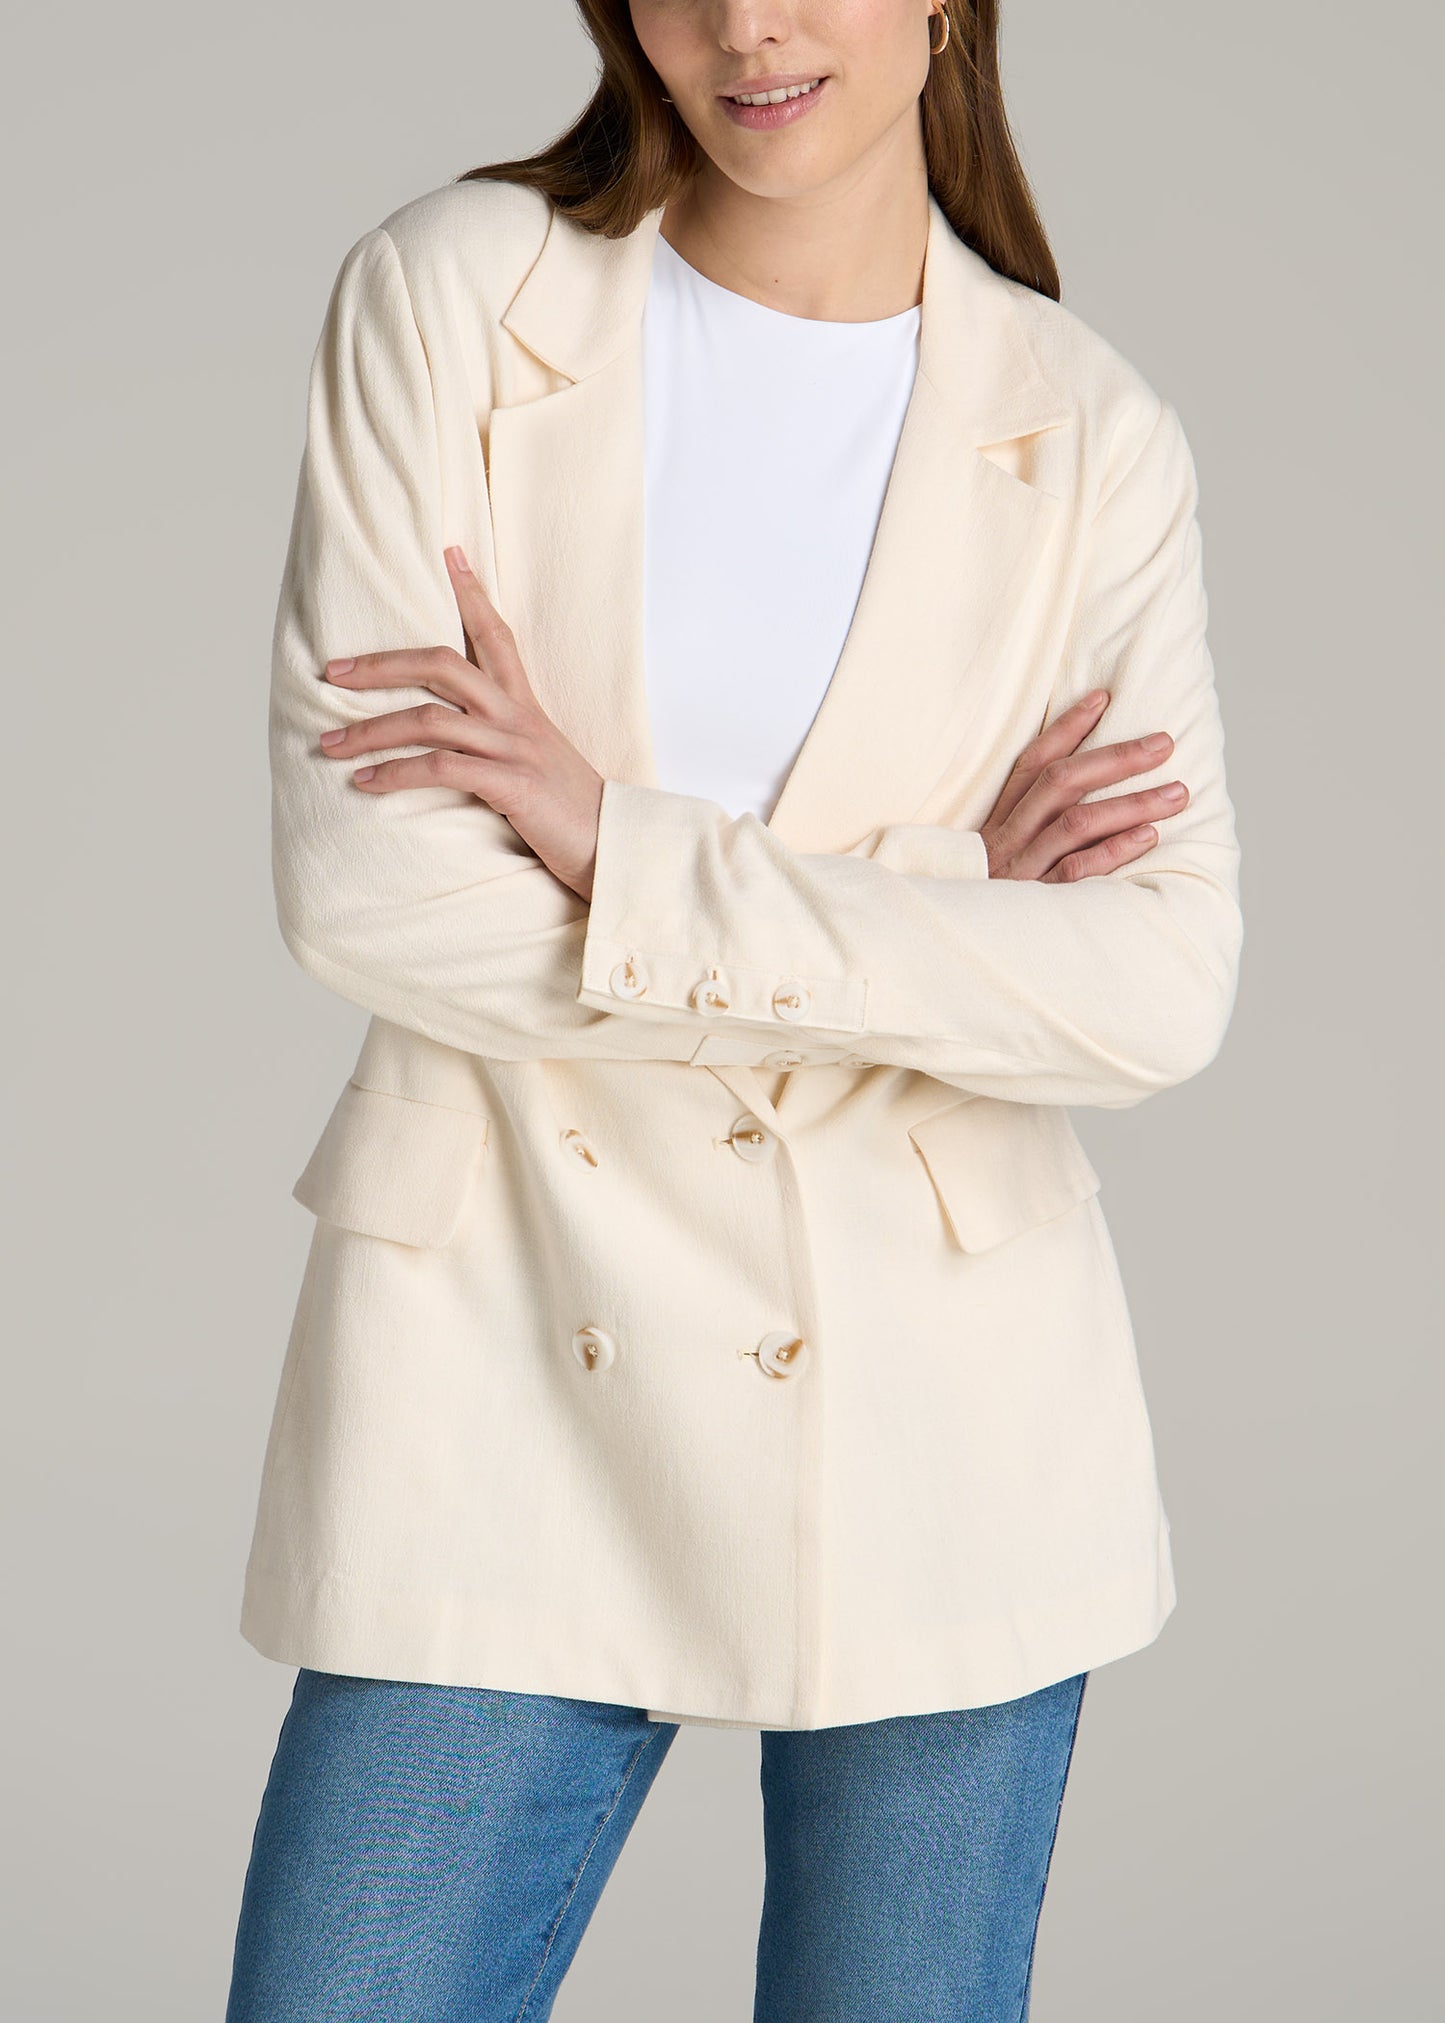 A tall woman wearing American Tall's Linen Blend Tie Back Blazer For Tall Women in the color White Alyssum.